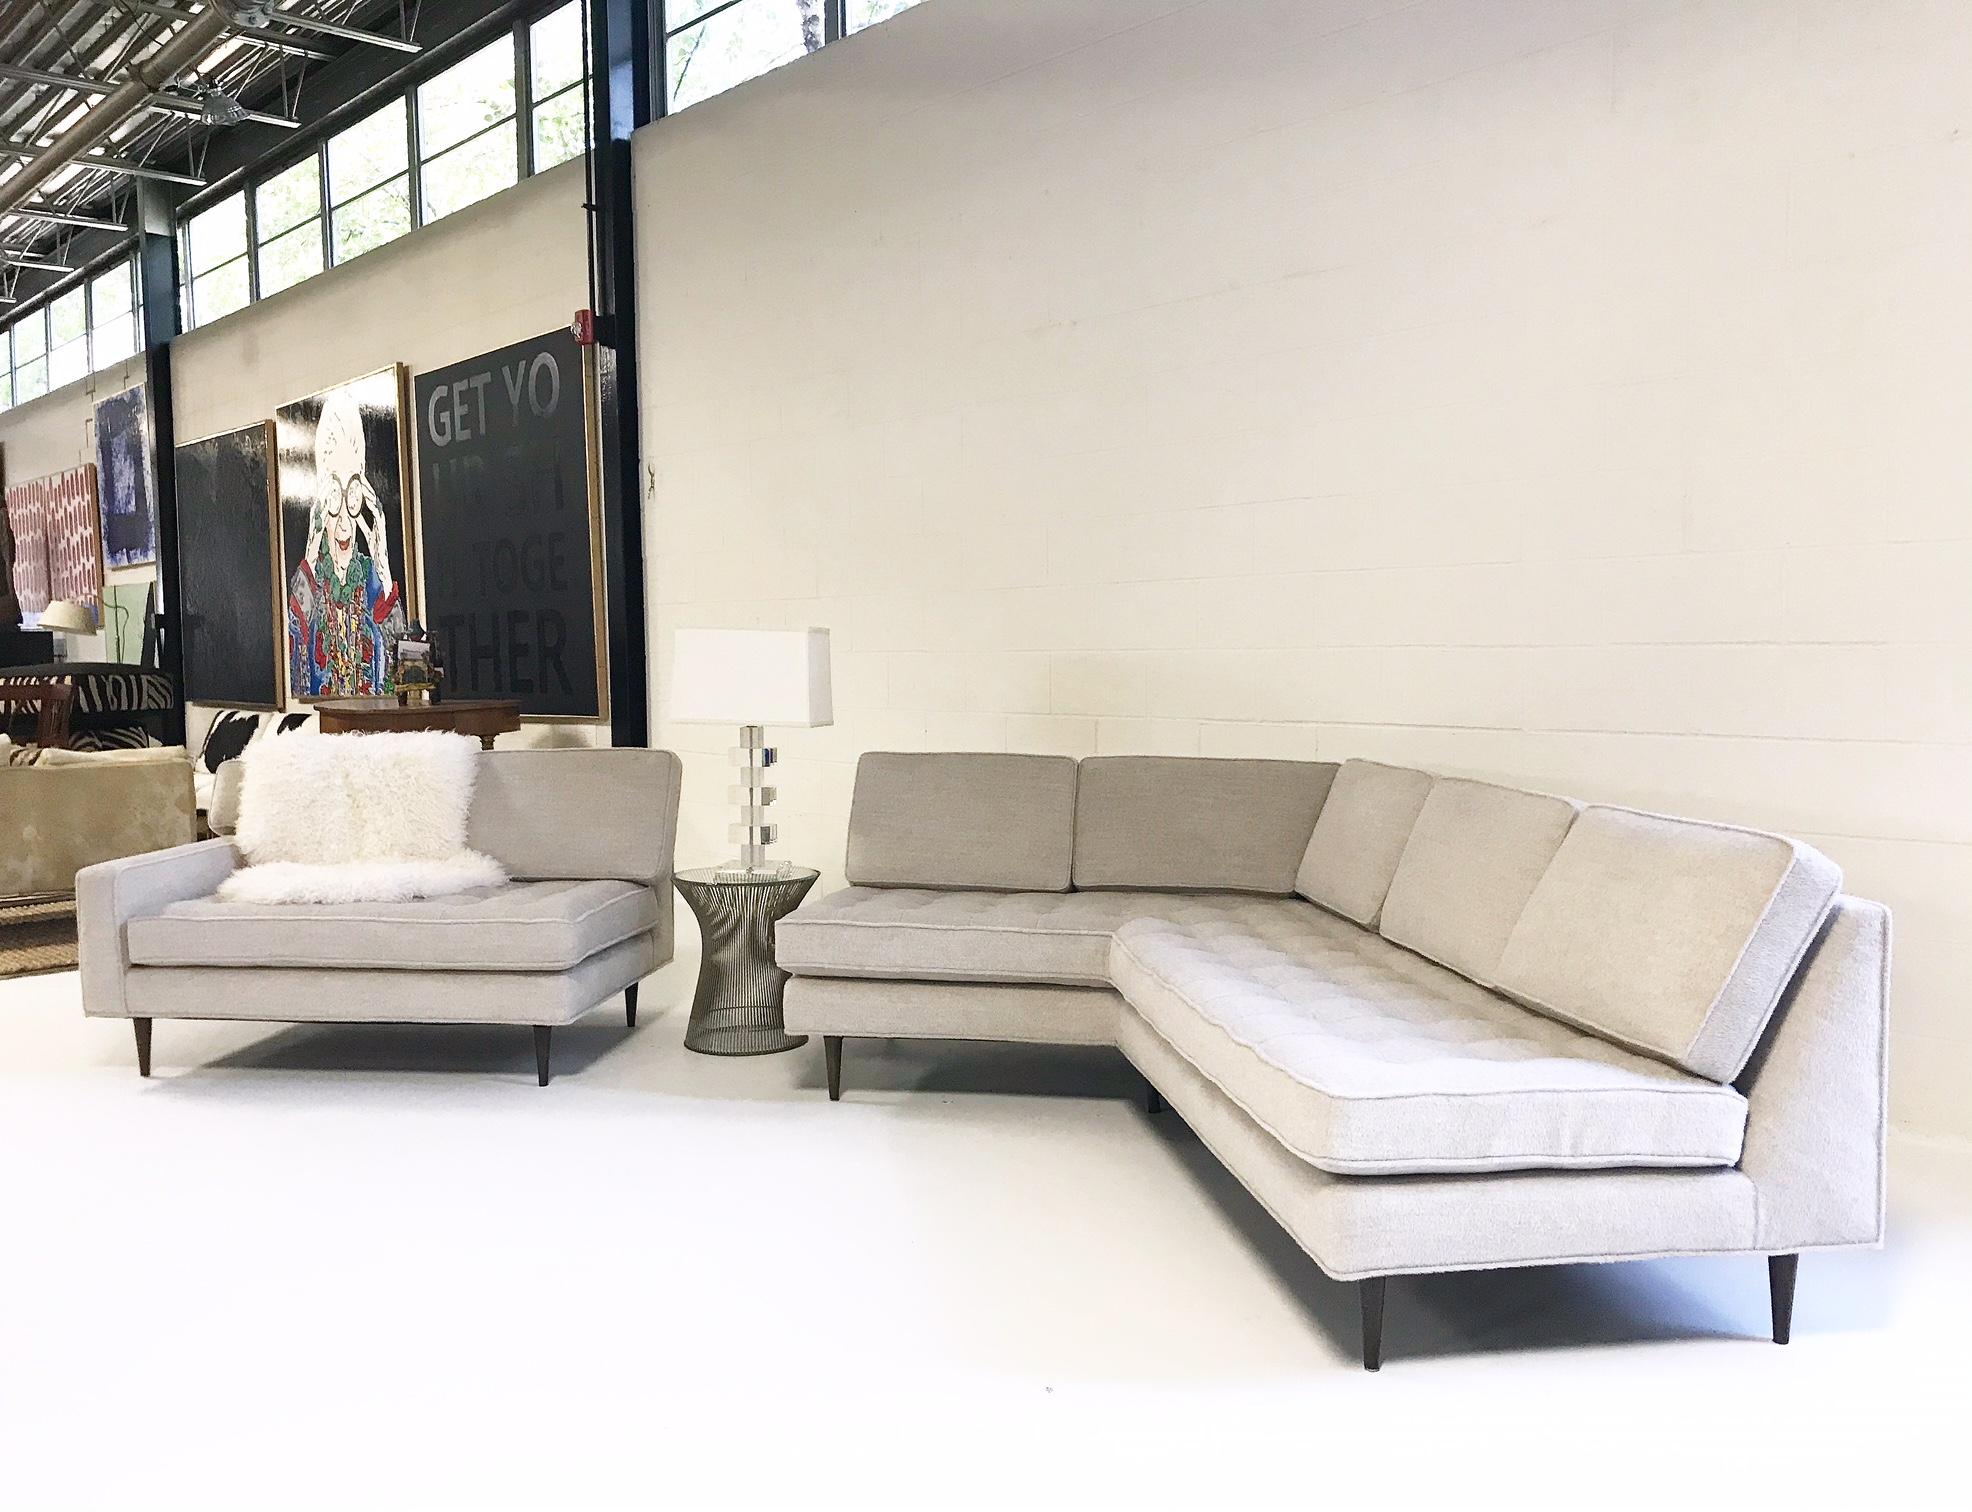 It was obvious this vintage sofa needed to be saved! The lines are precise and modern, the look is elegant and sophisticated. Under the care of our master upholsterers, this beautiful mid-century sectional was completely rebuilt and underwent a